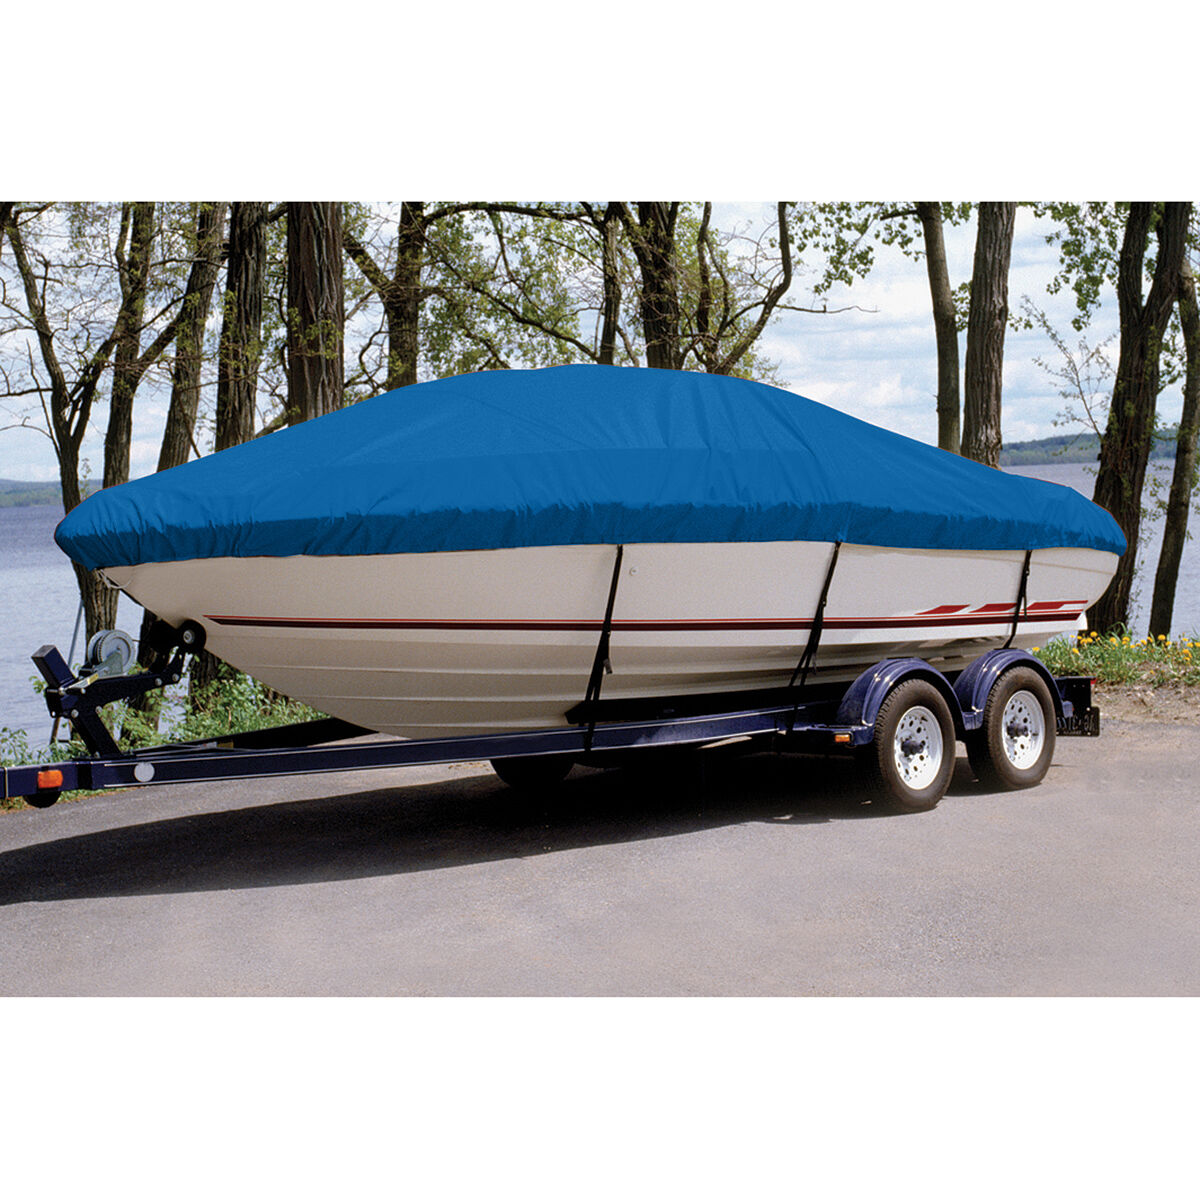 Taylor Trailerite Ultima Cover for 2010 Tahoe Q4SS WS IO in Blue